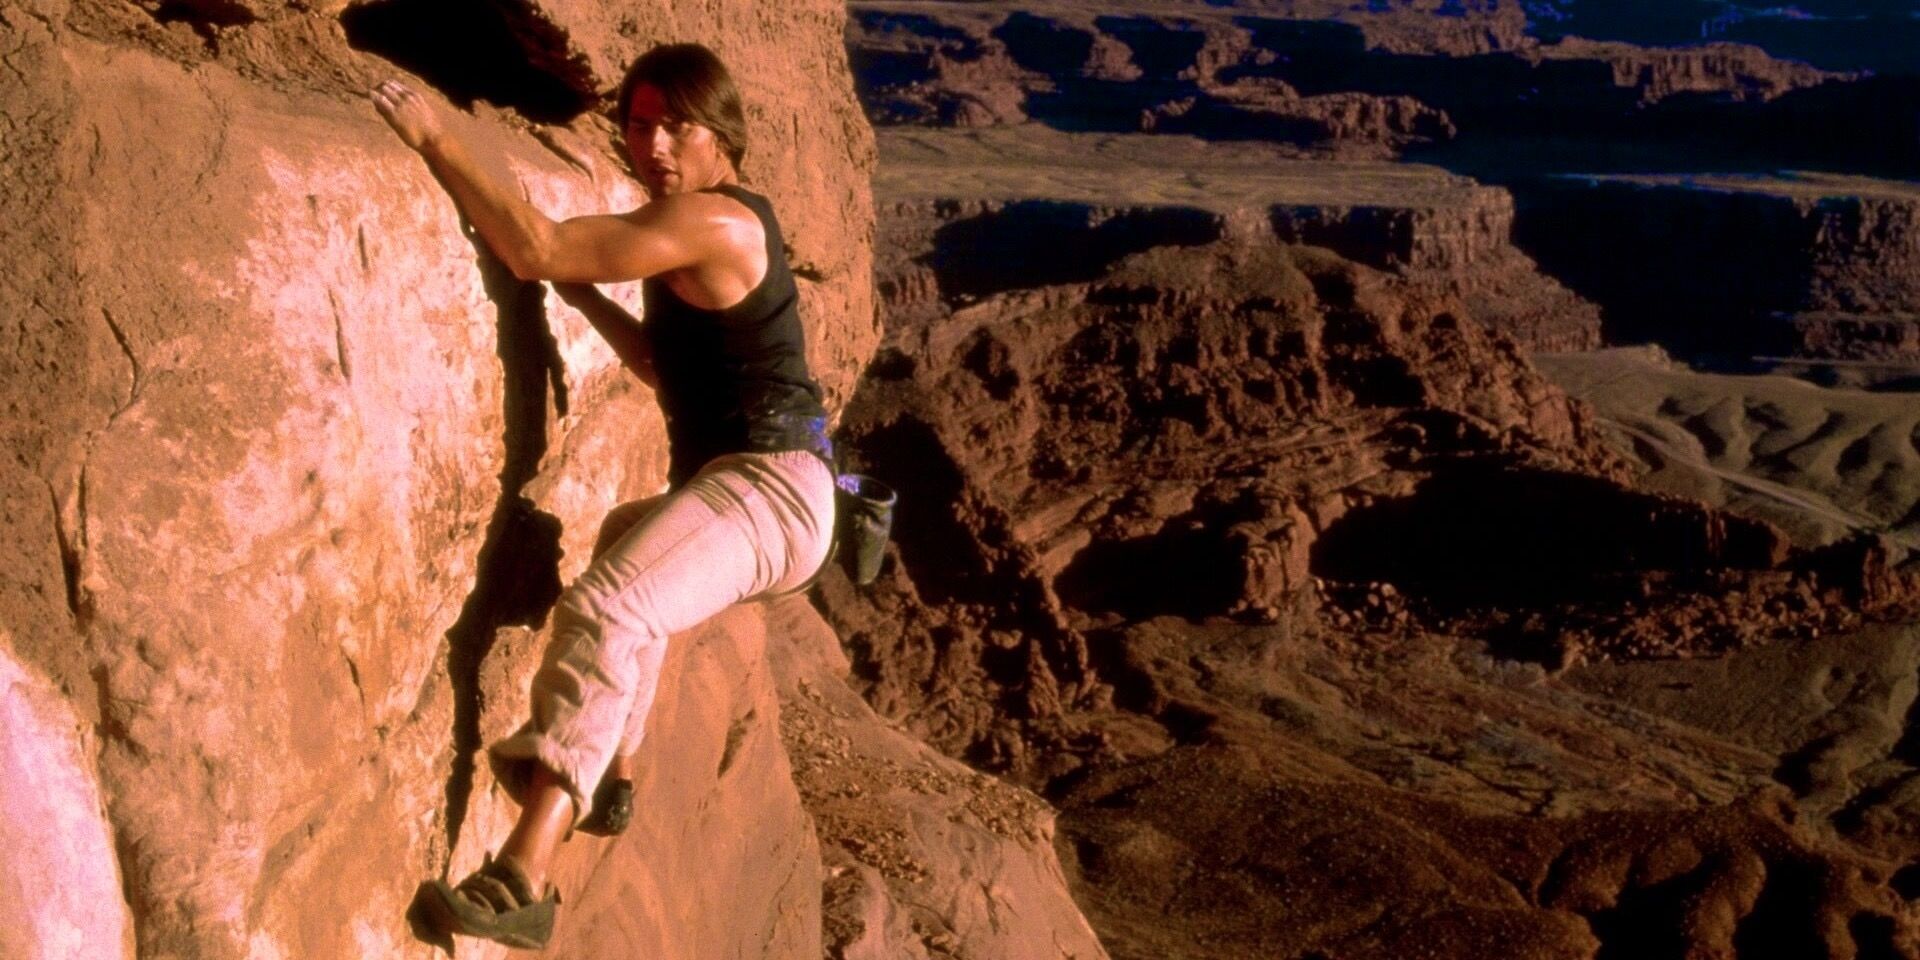 tom cruise as ethan hunt rock climbing mission impossible 2